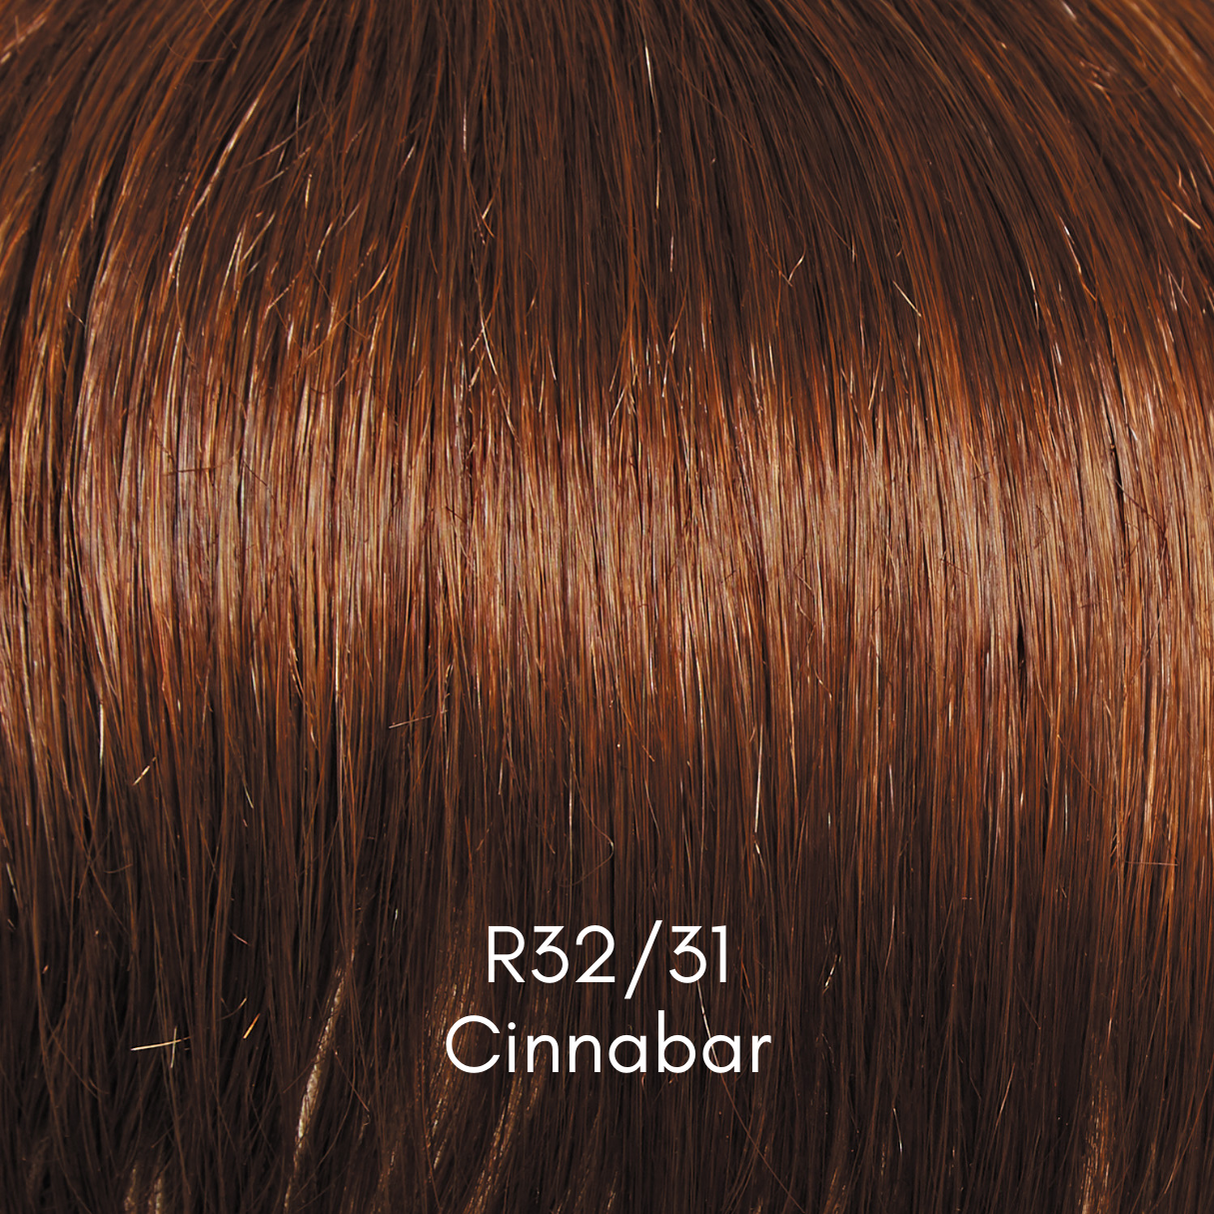 Cinch - Signature Wig Collection by Raquel Welch